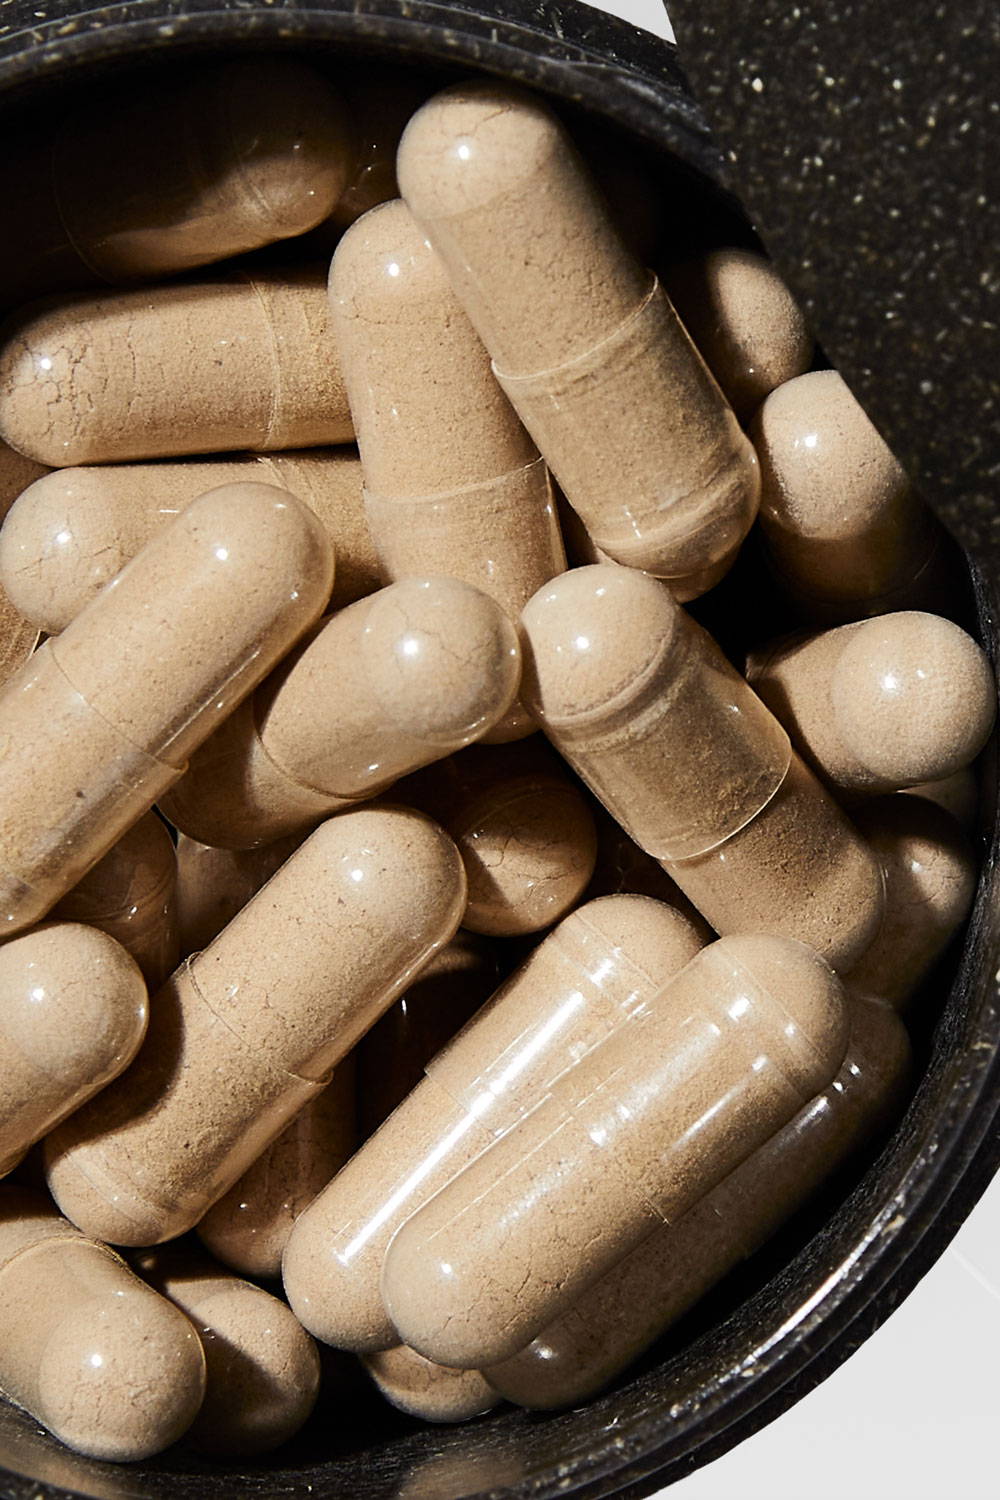 Super anti-aging supplements